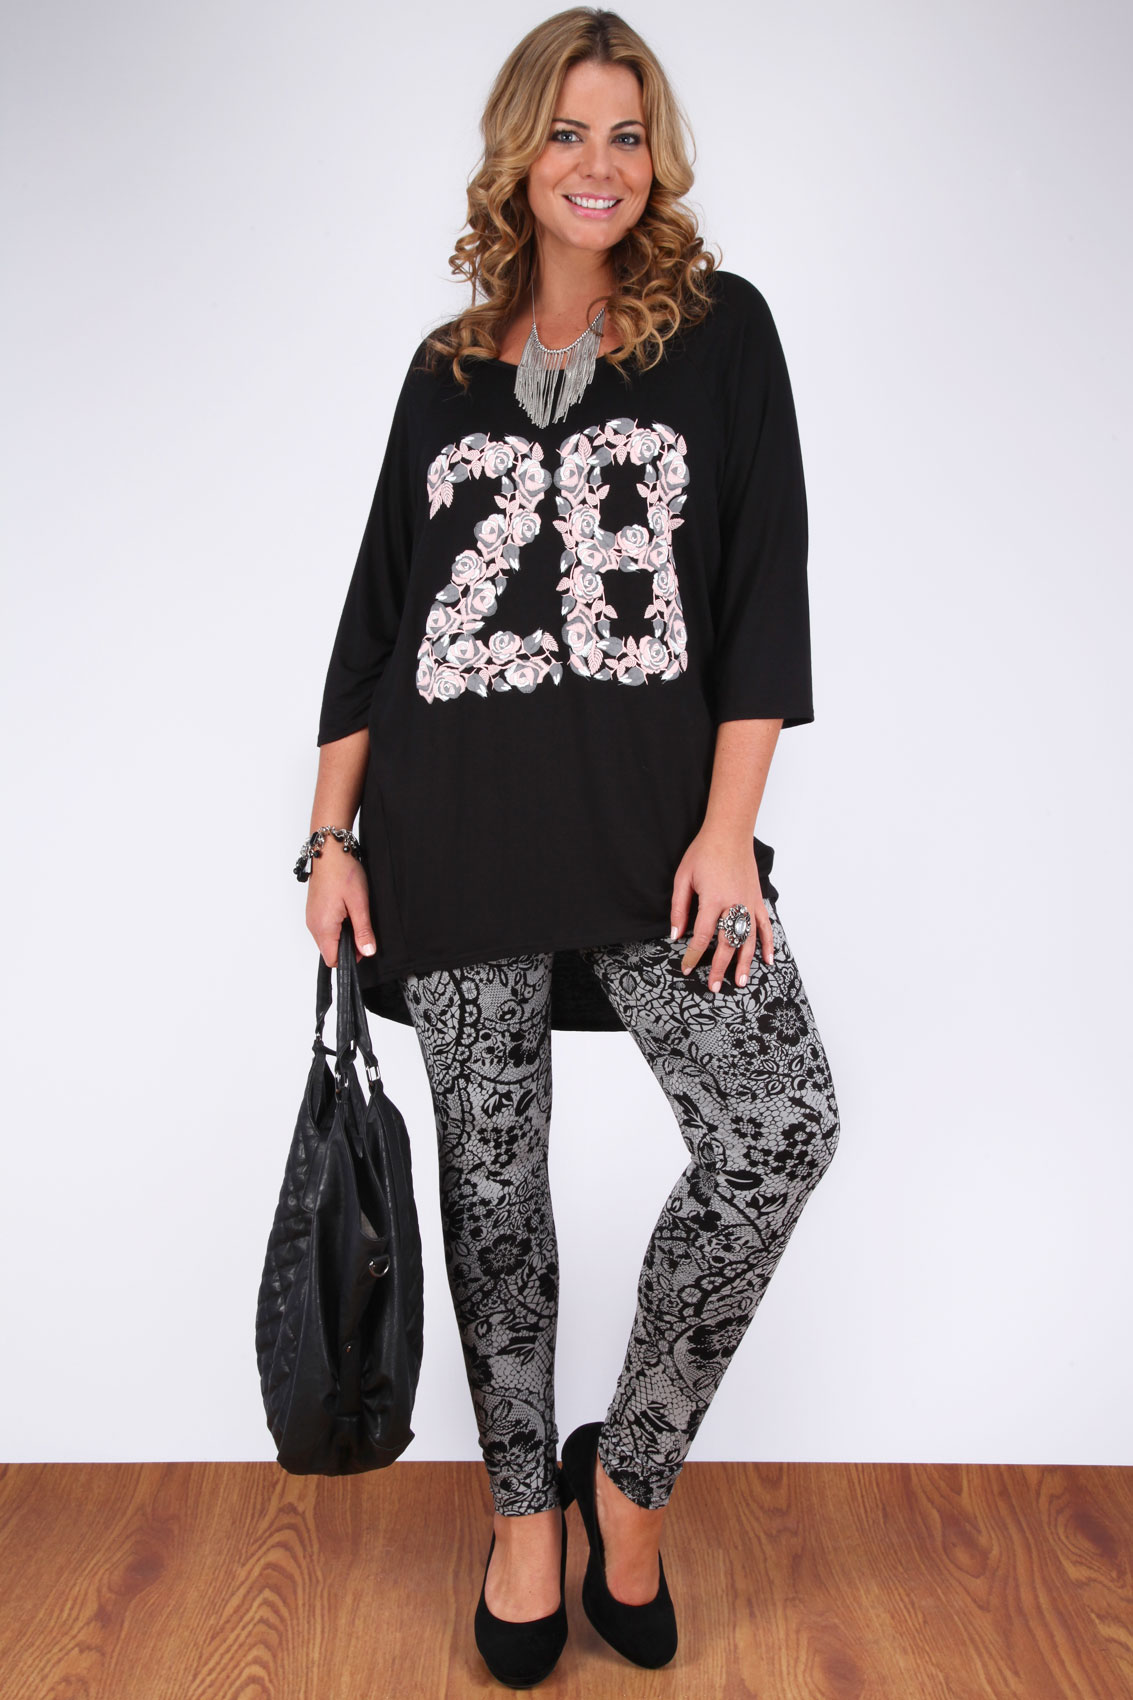 Grey And Black Floral Lace Print Full Length Leggings plus size 16,18 ...